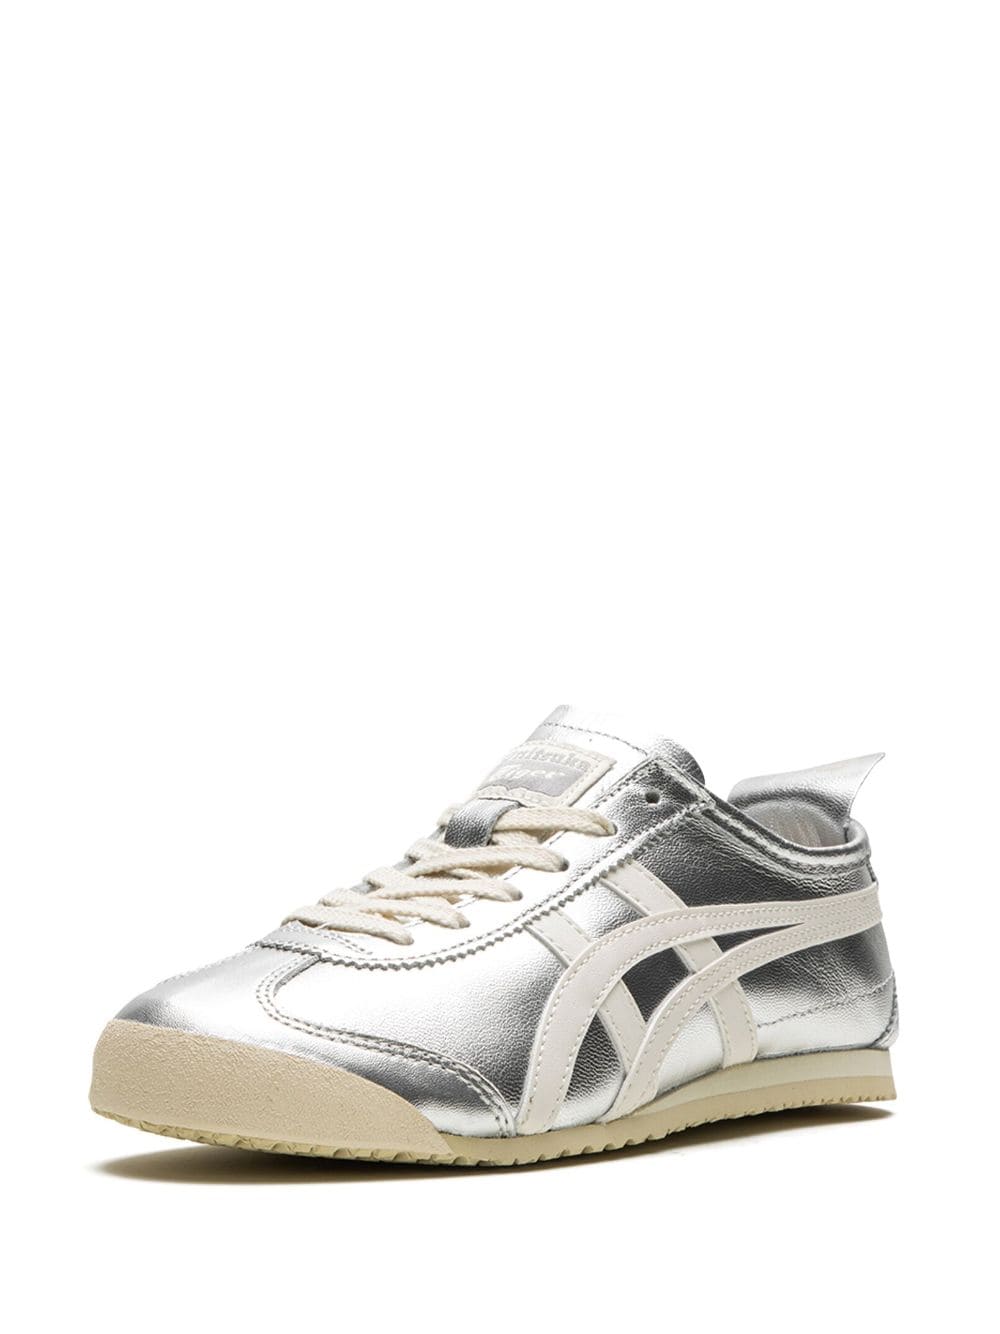 Shop Onitsuka Tiger Mexico 66 "silver Off White" Sneakers